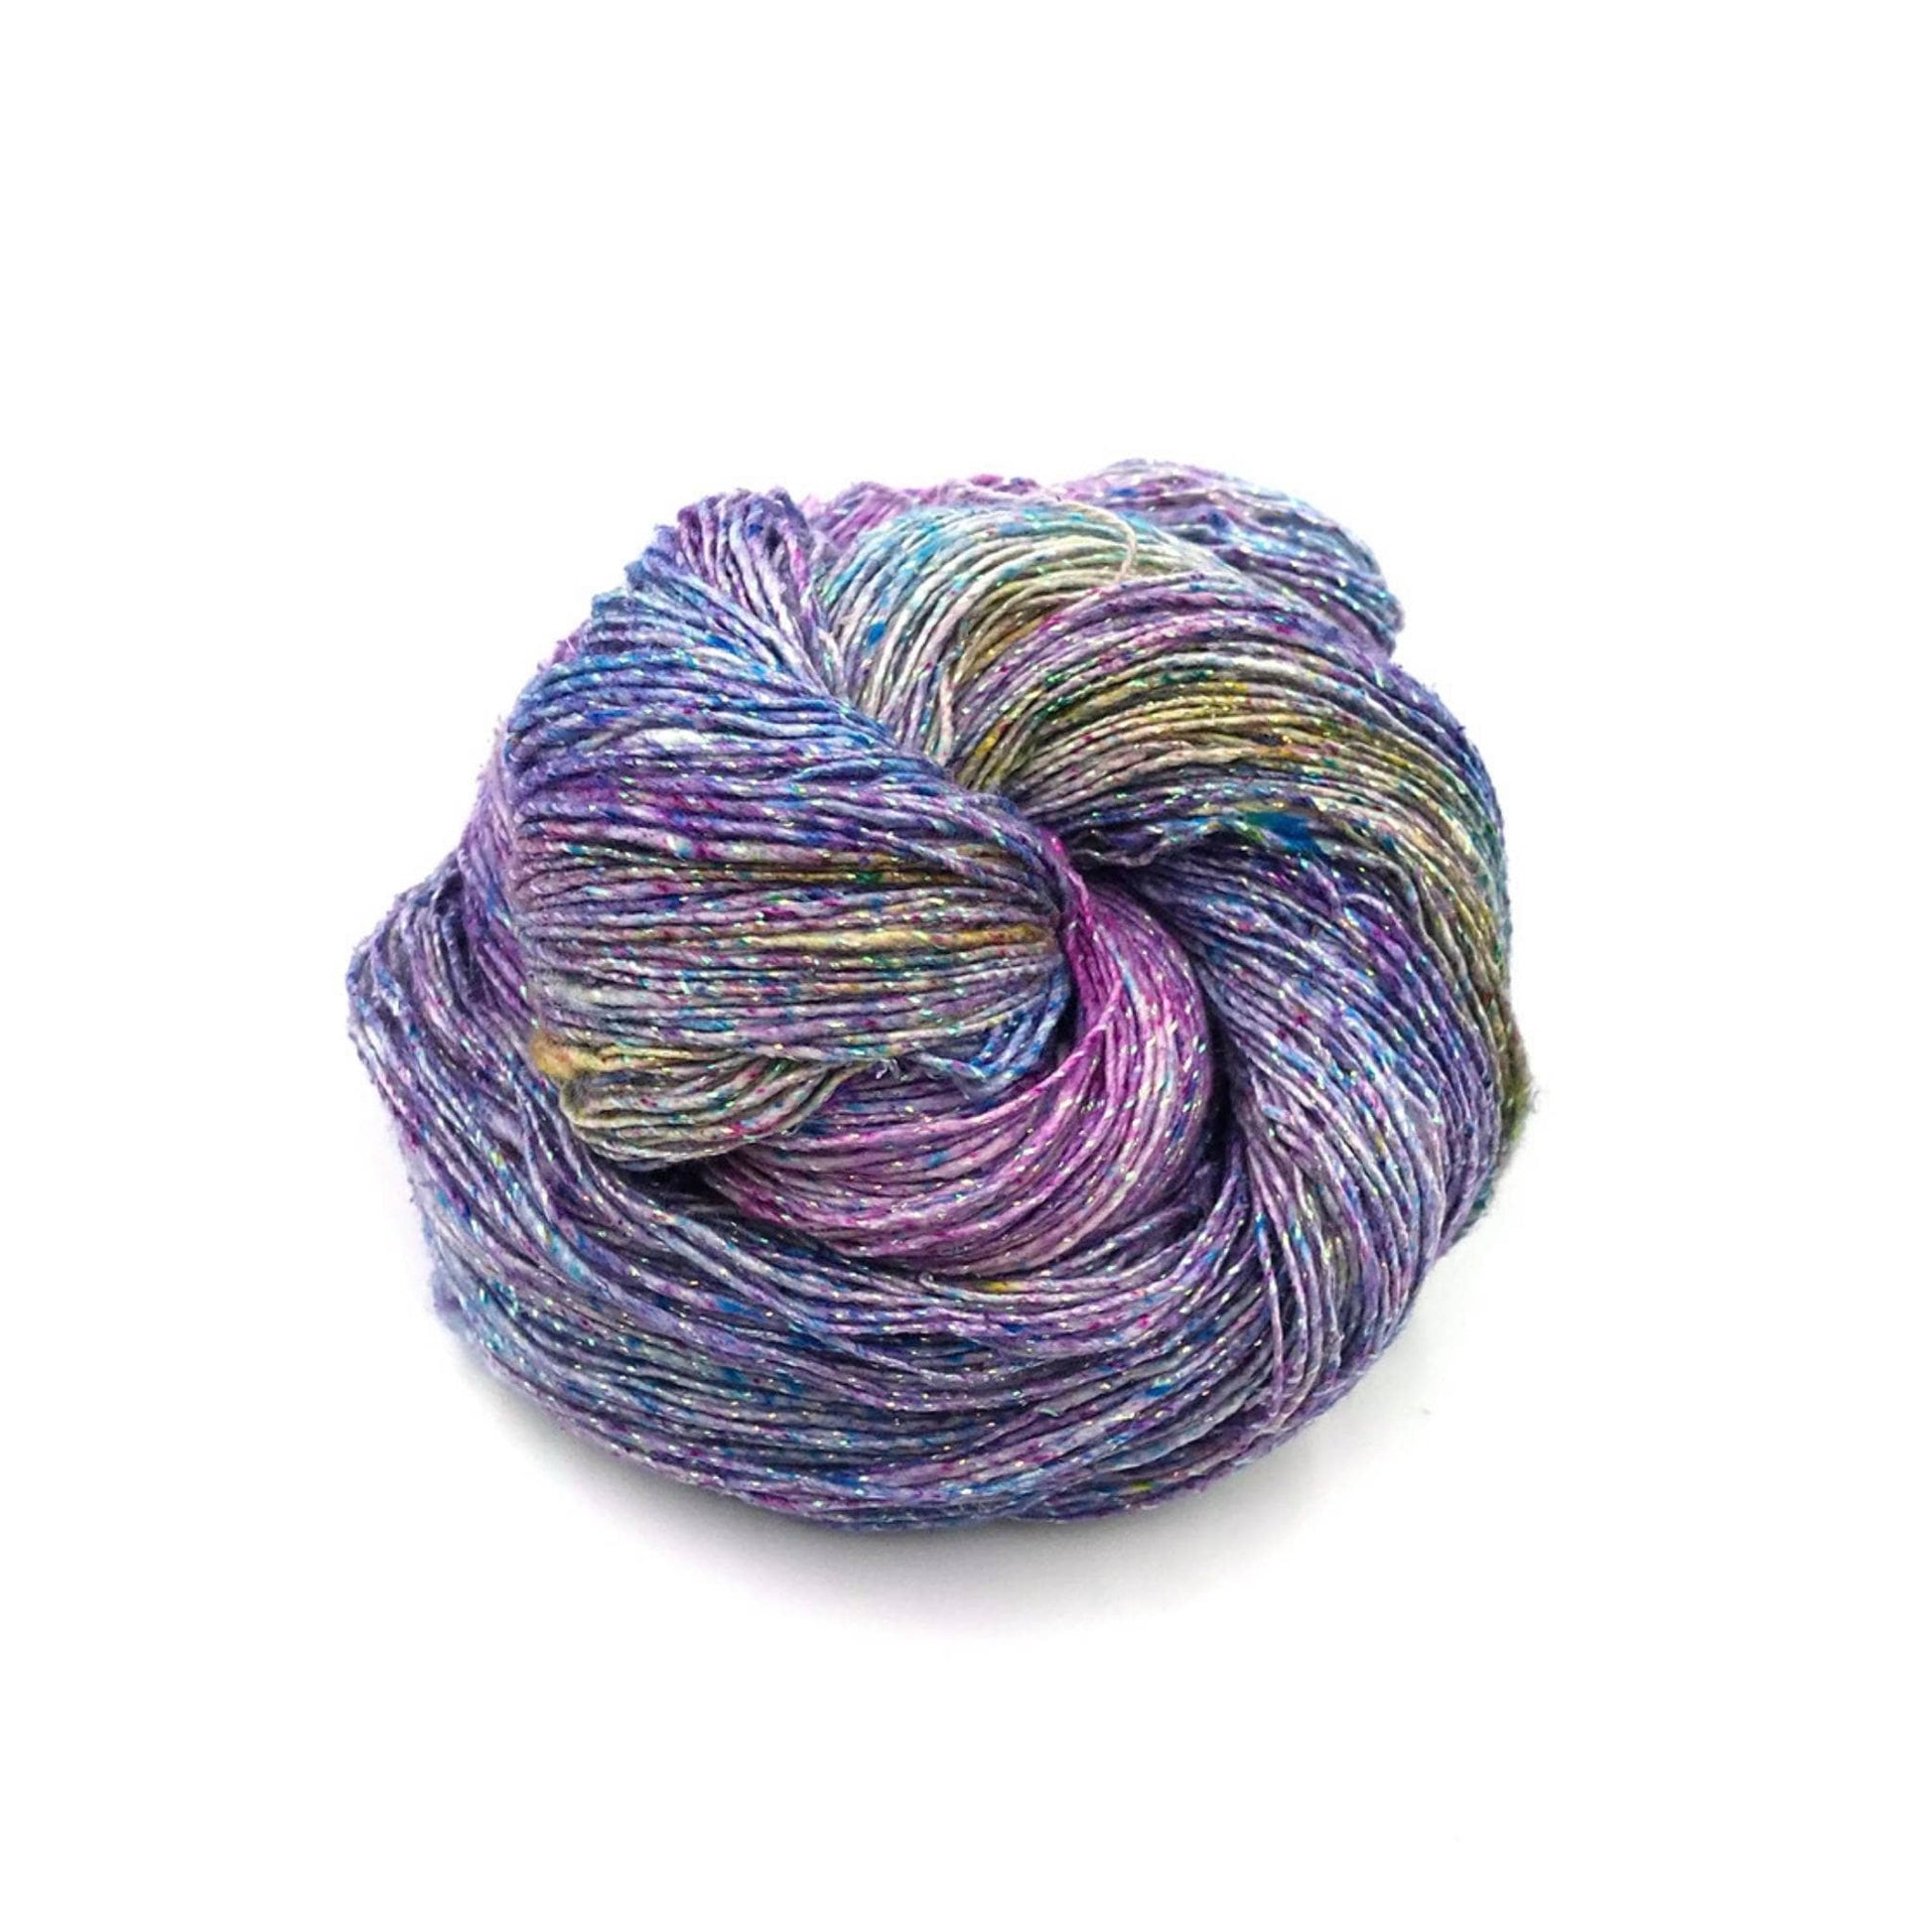 Lace weight silk yarn in color way Sparkle- Tidal Pool ( blue, purple and sparkle) in front of white background.